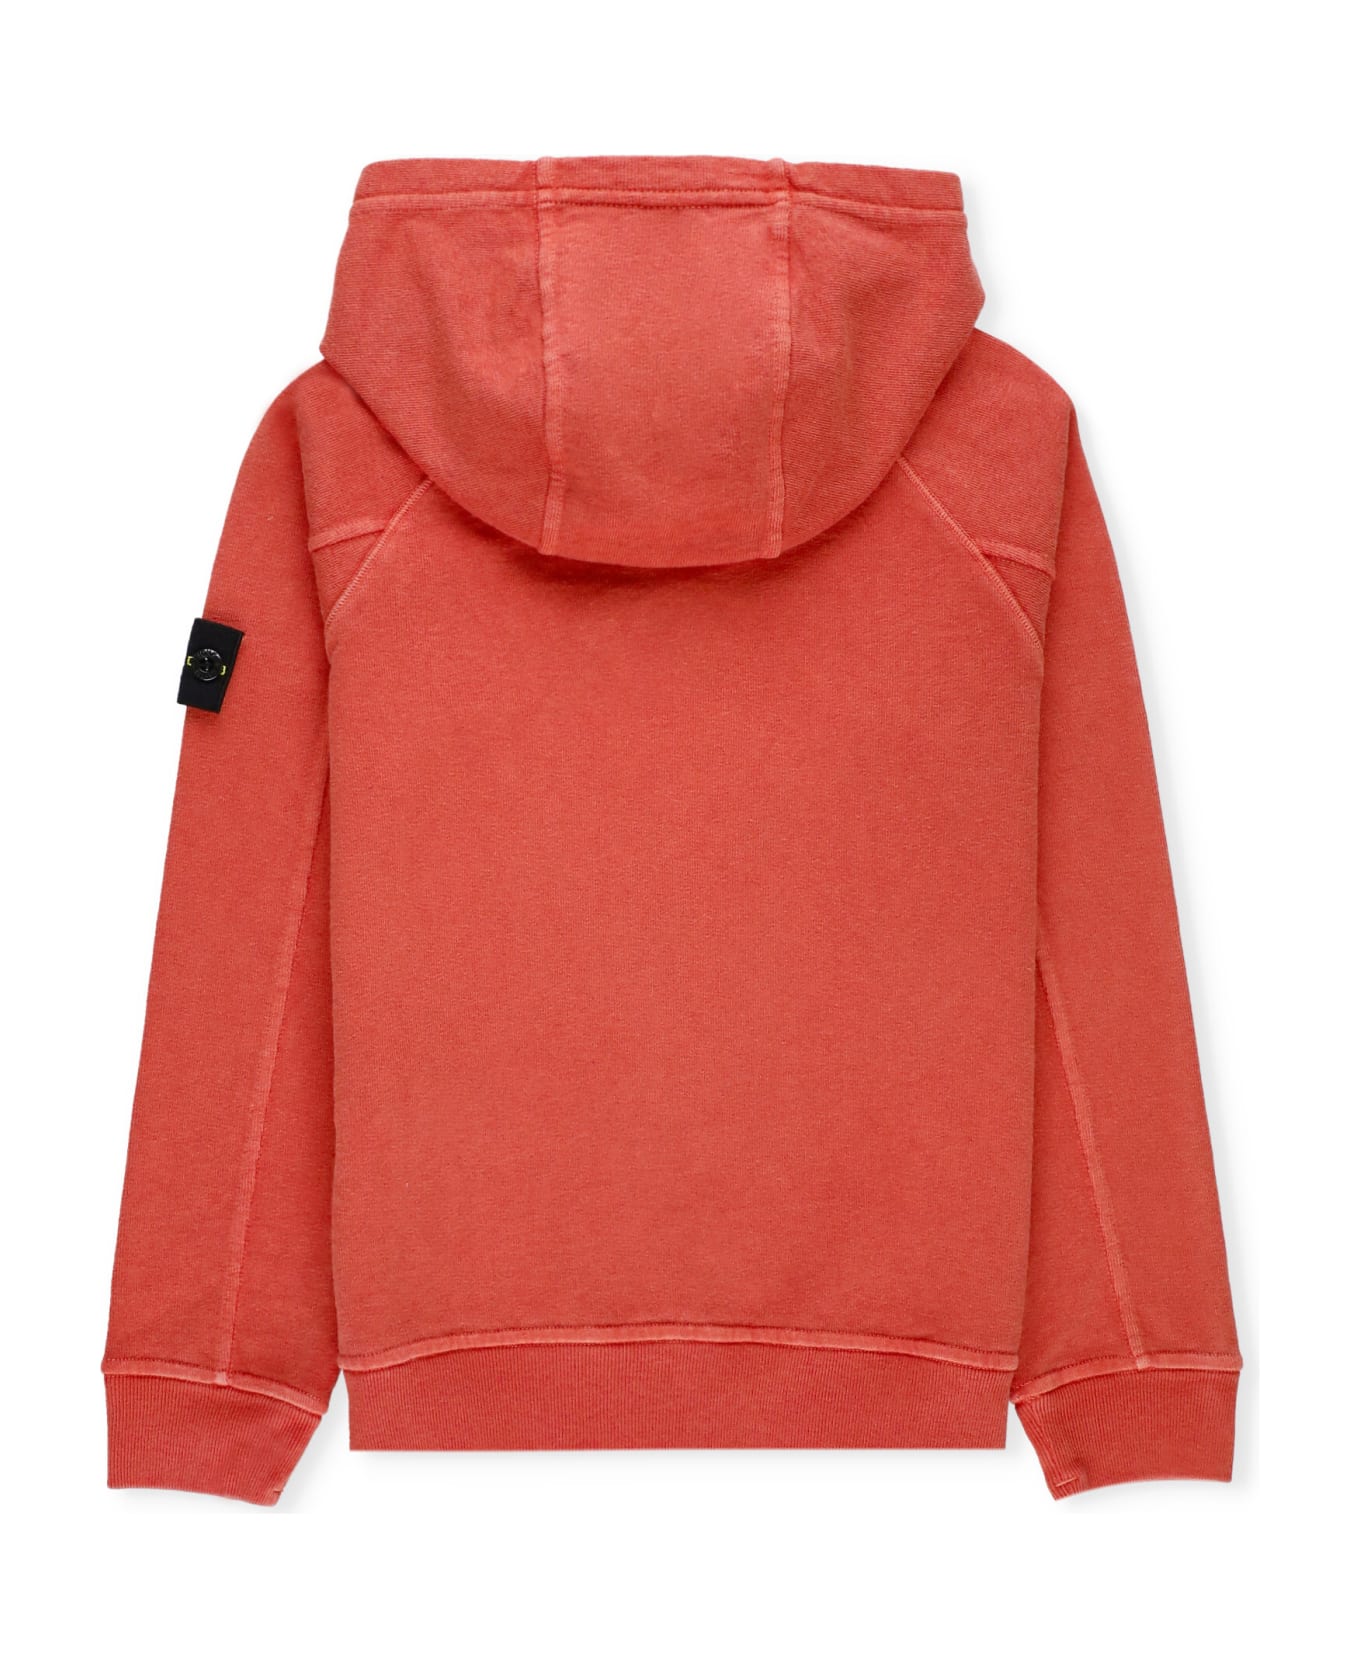 Stone Island Cotton Hoodie - Red